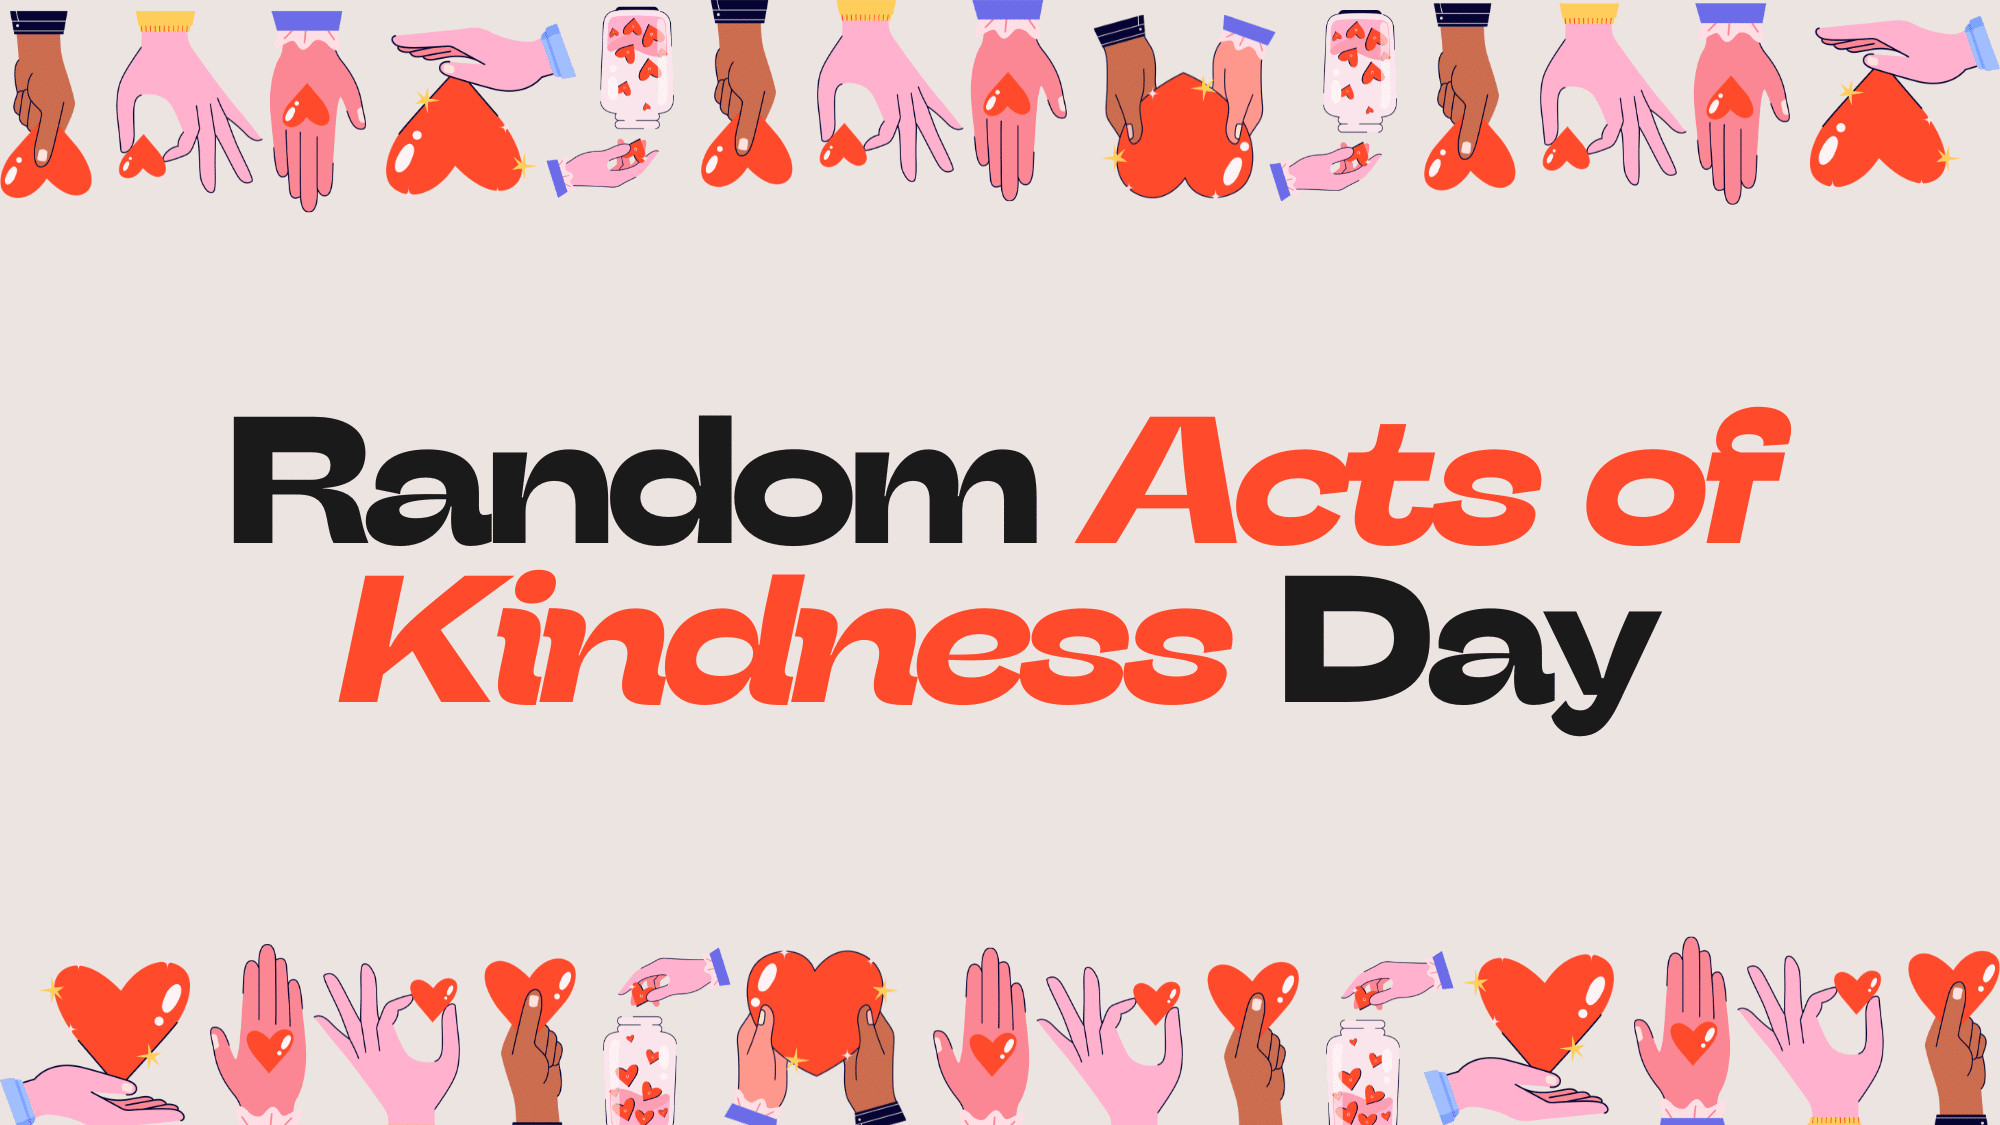 Random acts of kindness day image of hands with hearts